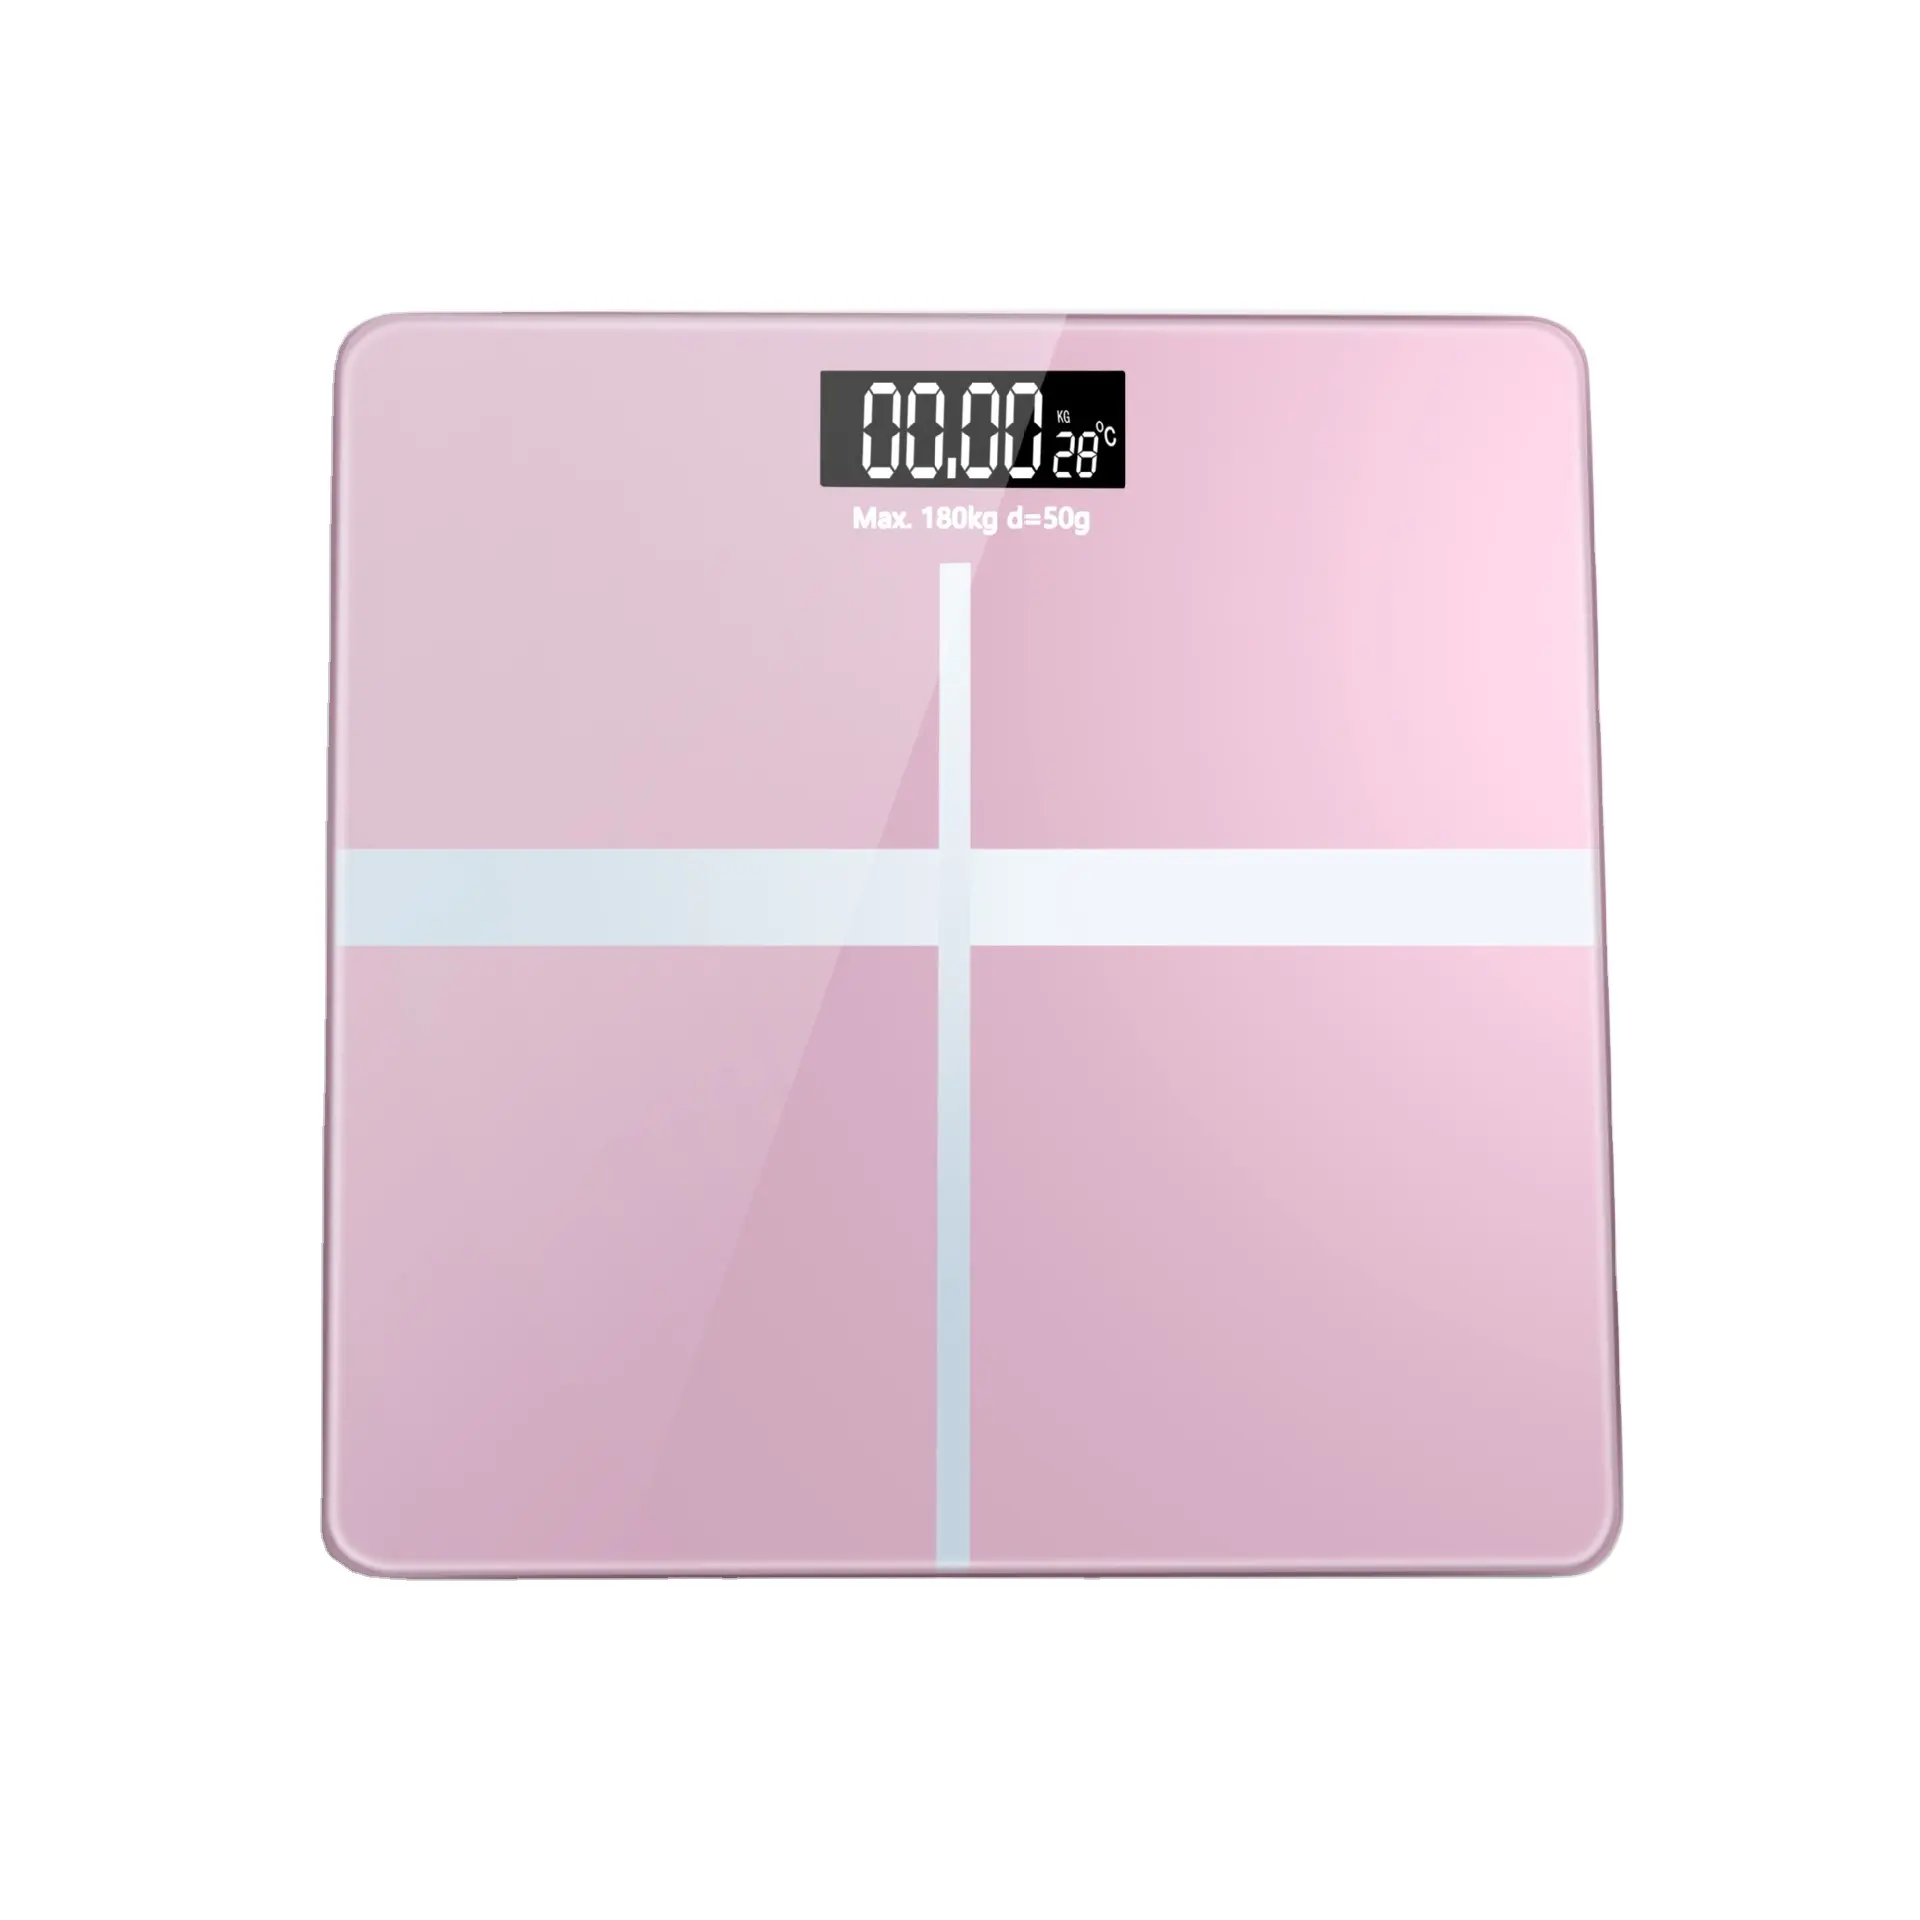 Home Electronic scales glass body health scale human body